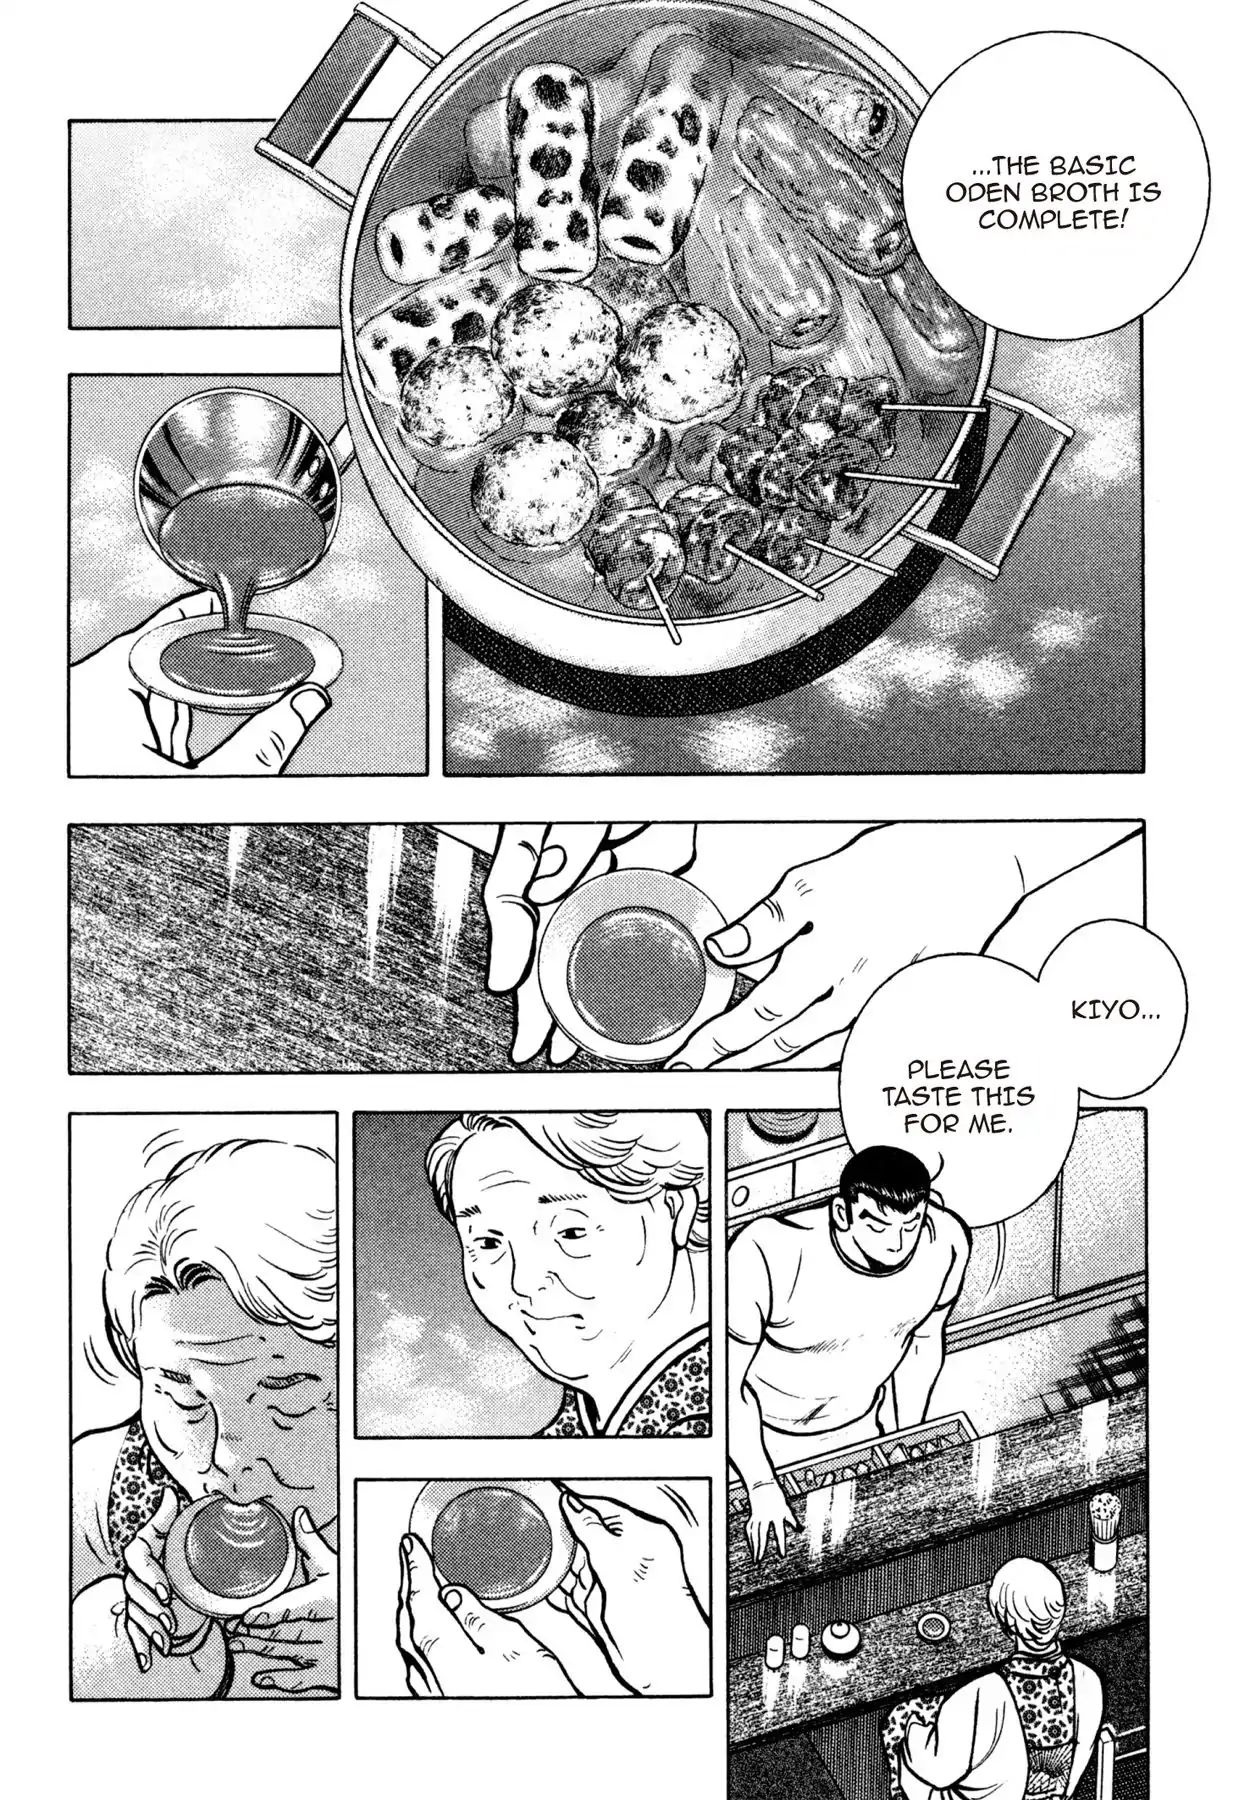 Shoku King VOL.19 CHAPTER 167: UNLIMITED MEALS